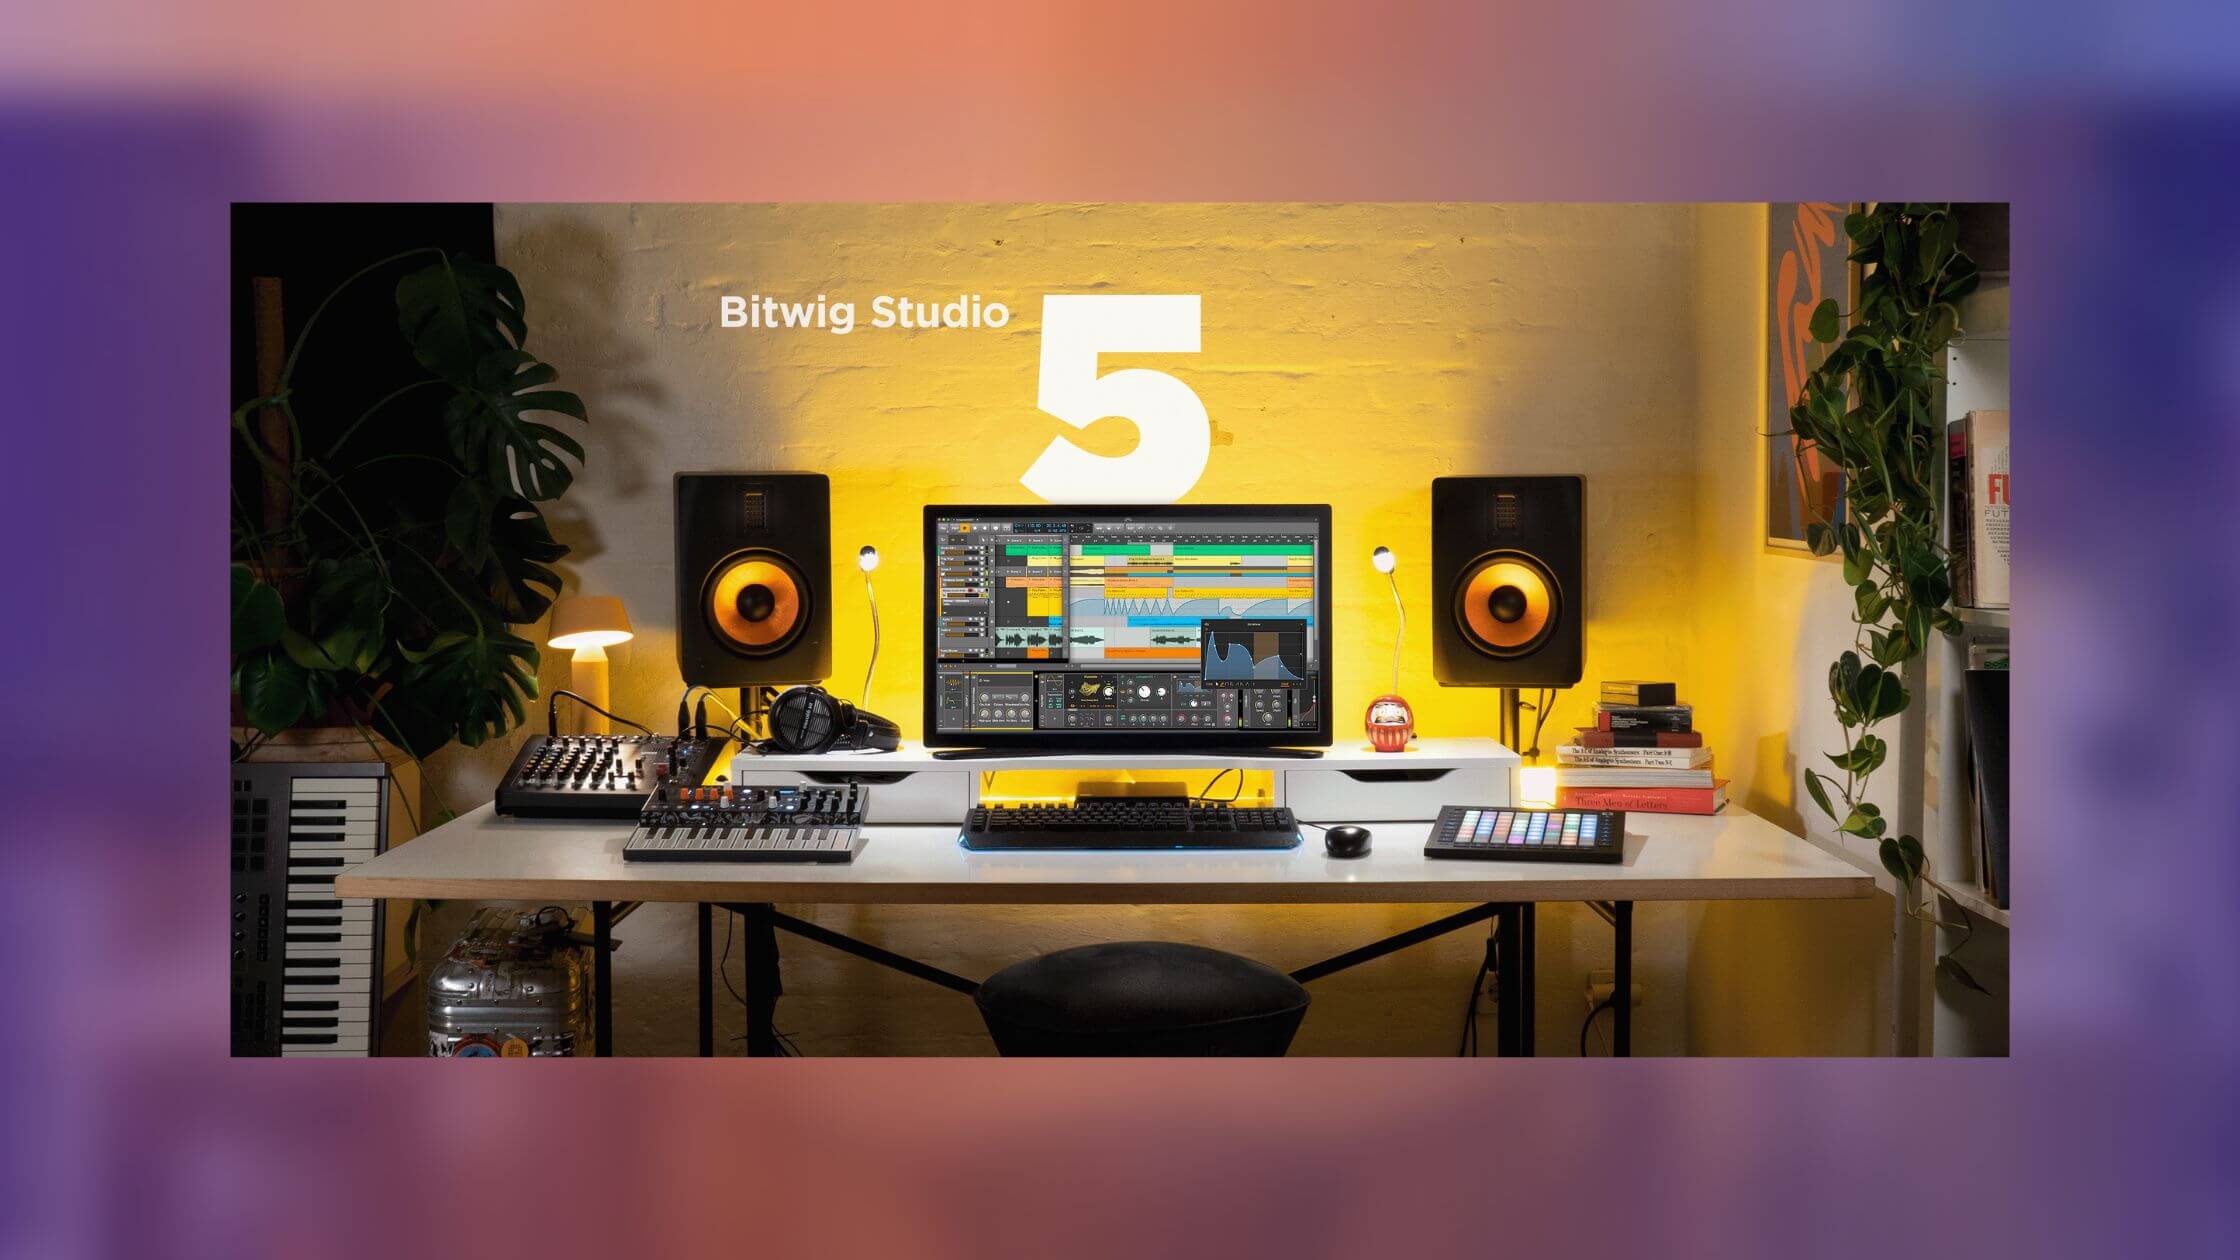 Bitwig Studio 5 is available to buy after months of Beta testing – get yours here